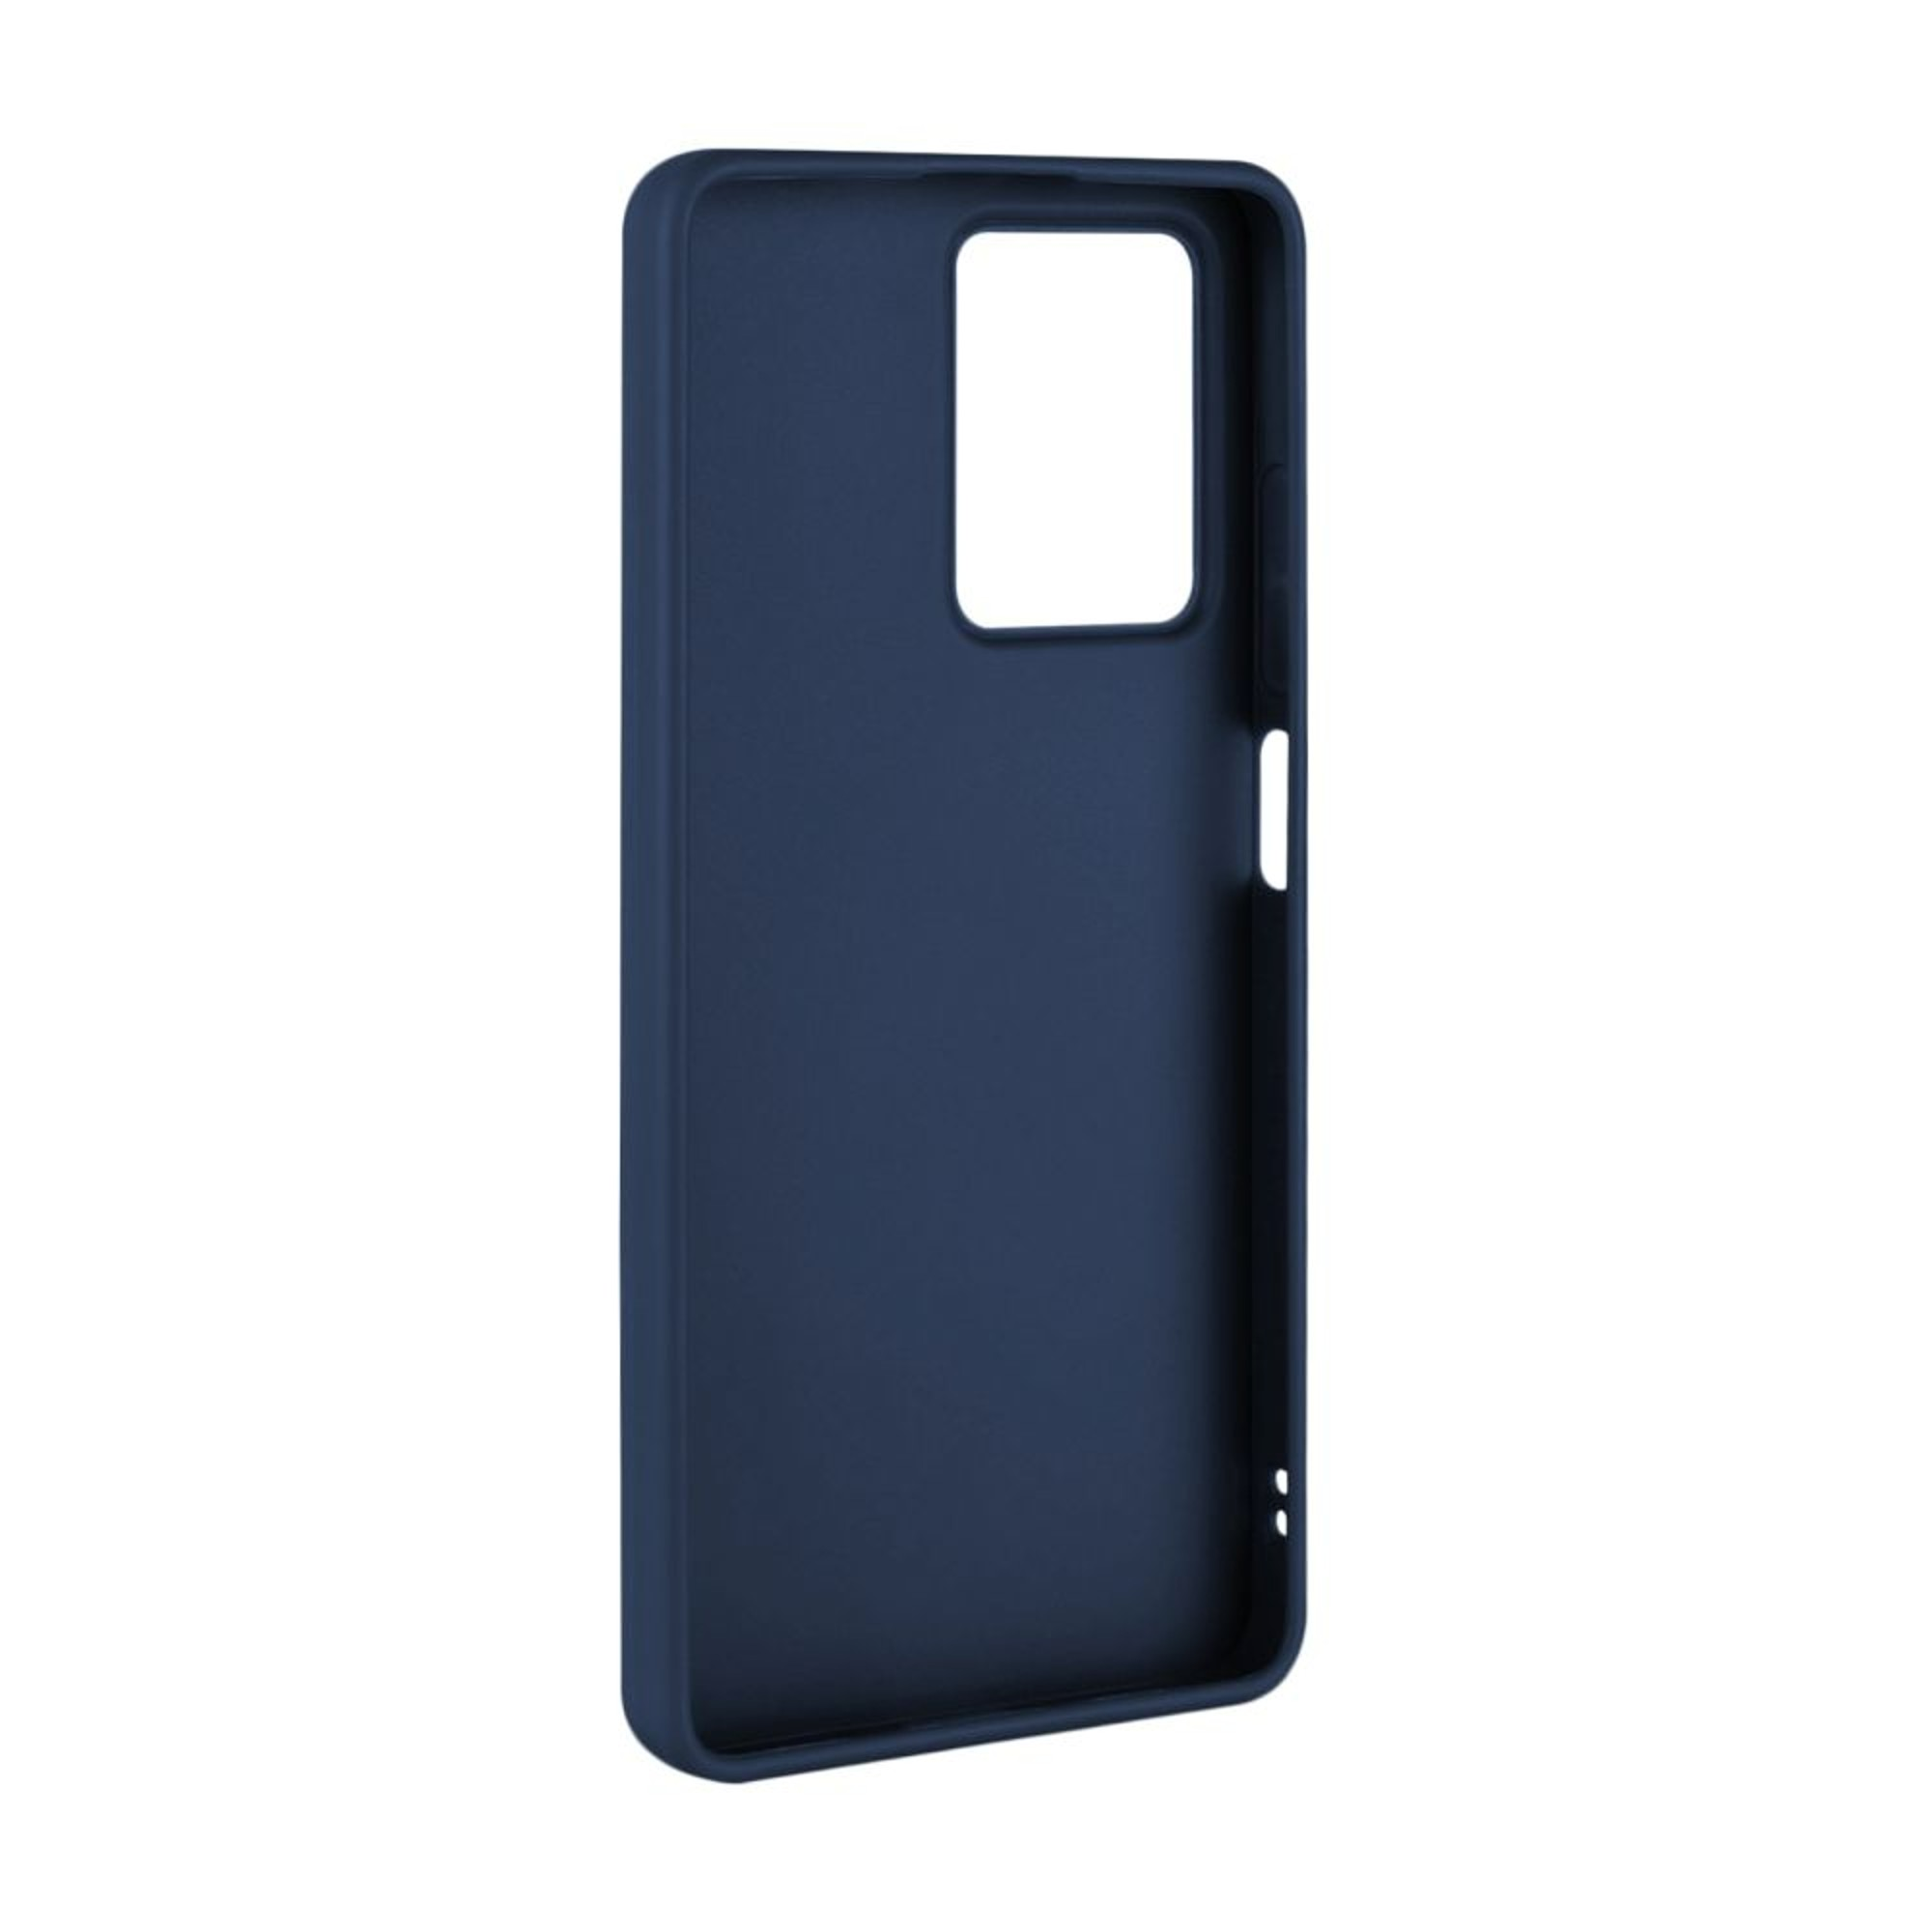 FIXED Story Soft-Touch Backcover, Xiaomi, X5 POCO Blau 5G, FIXST-1101-BL, Pro